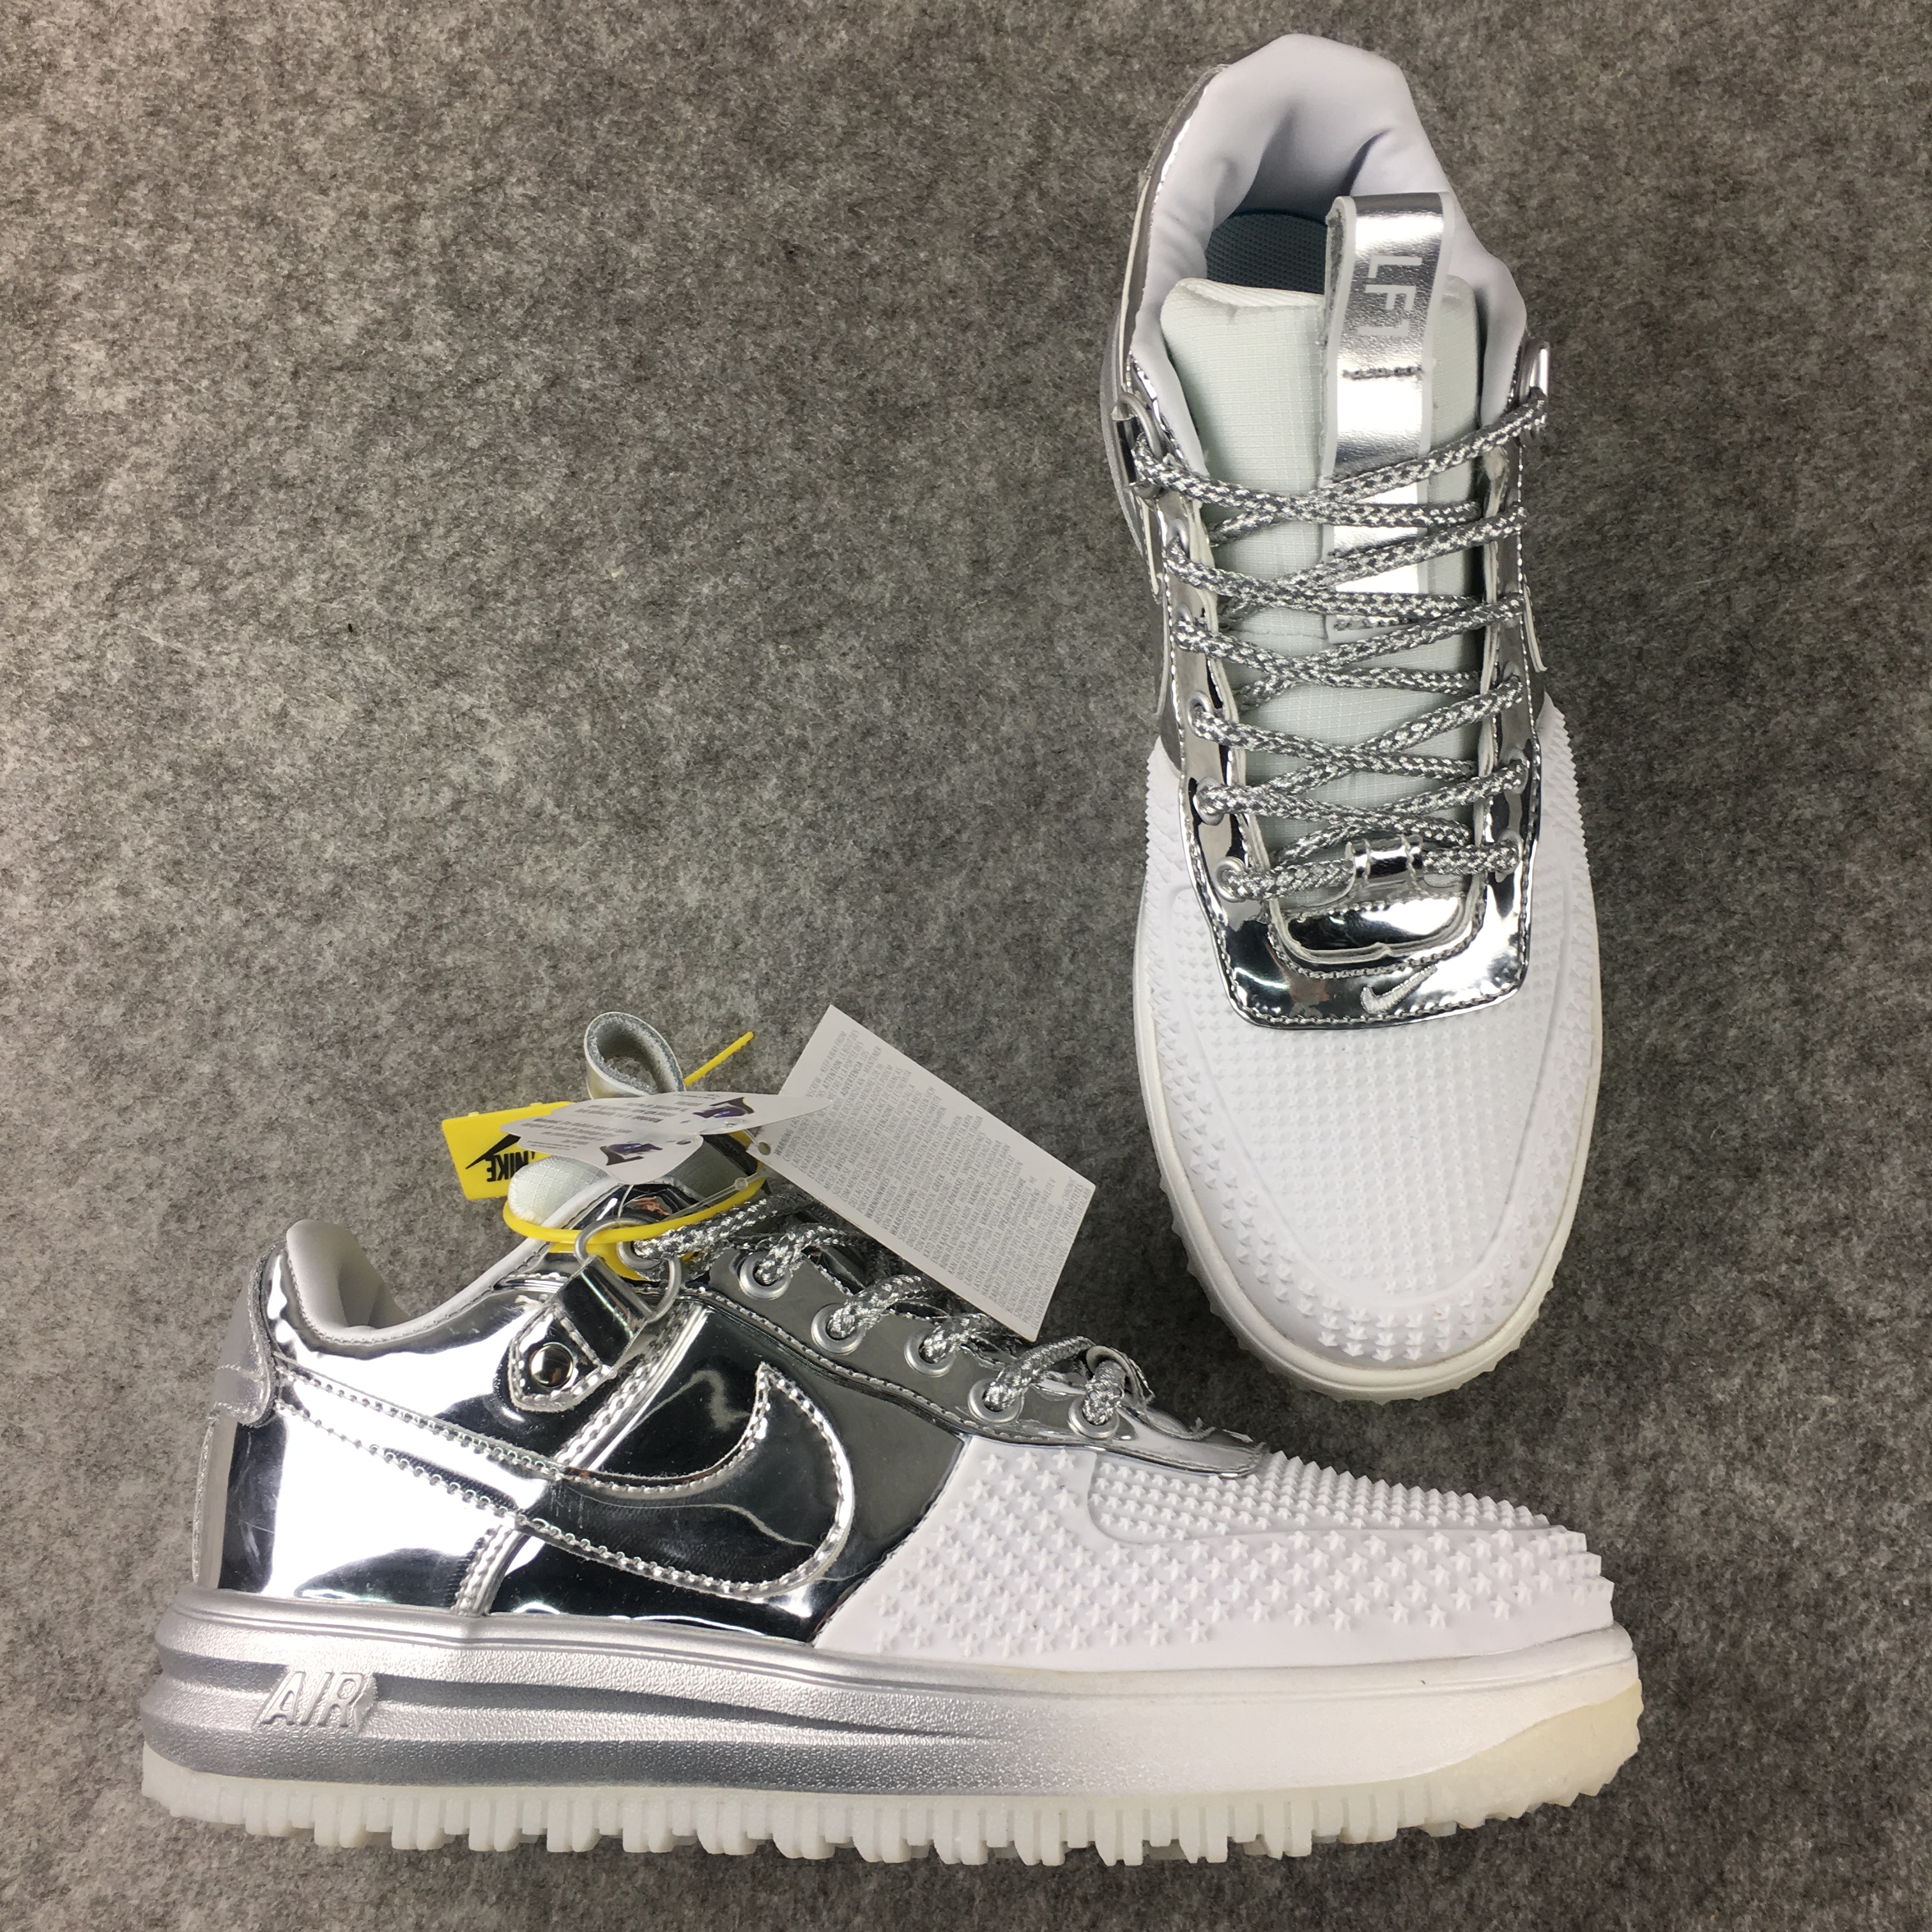 Nike Lunar Force 1 Low White Silver Shoes